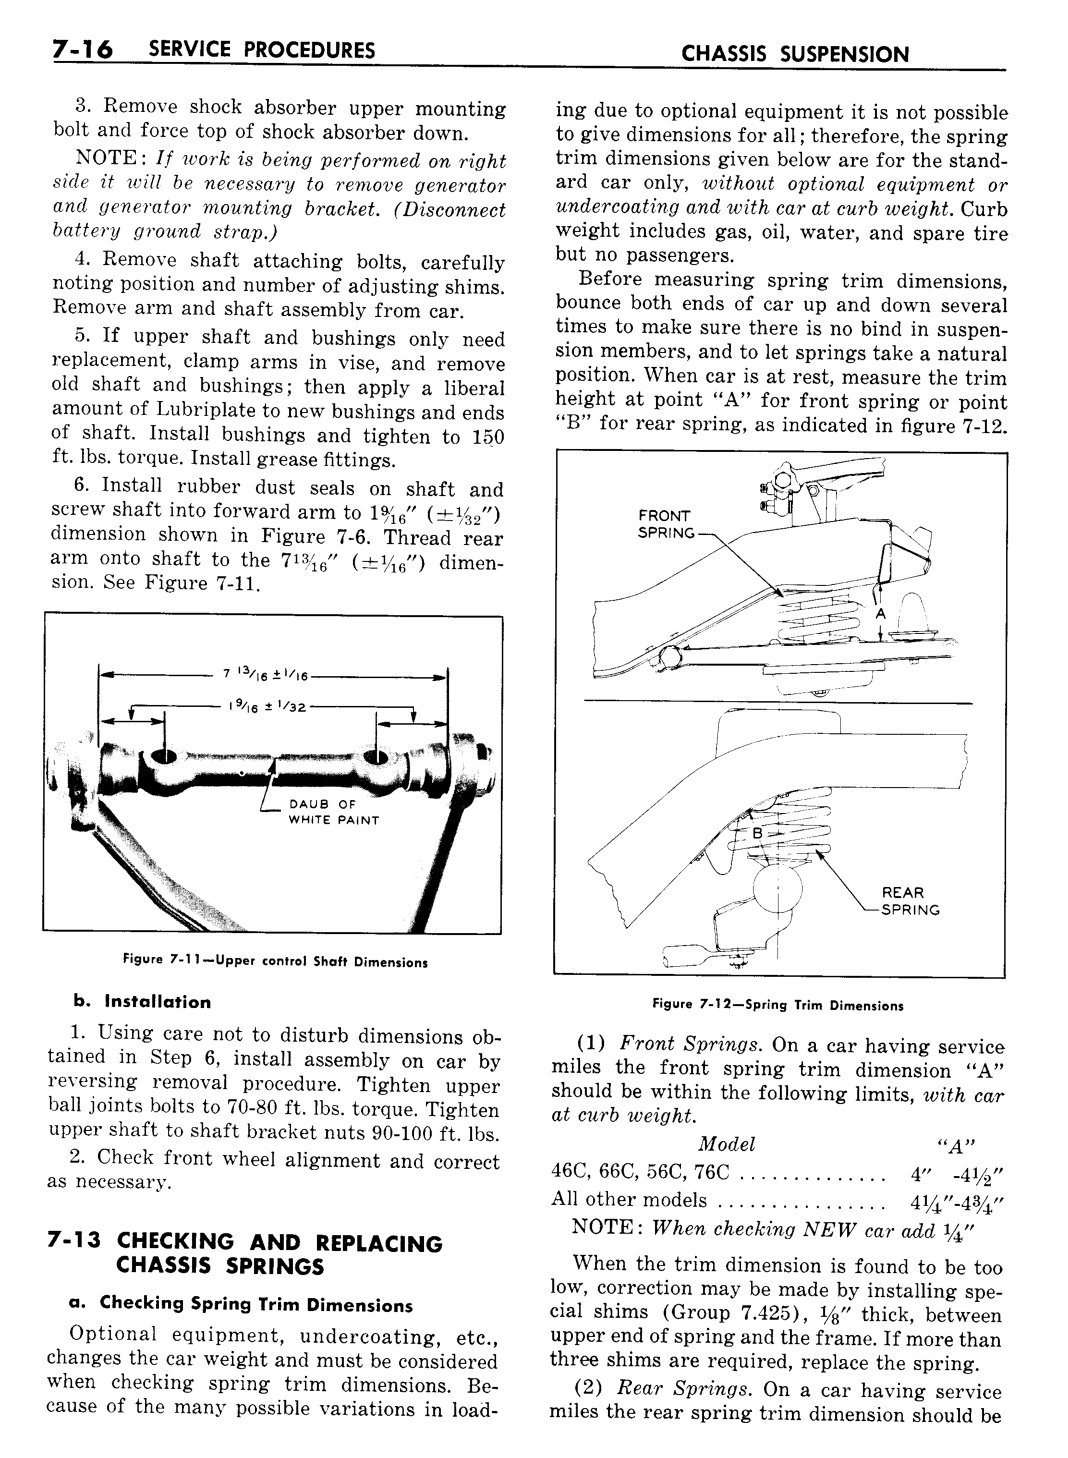 n_08 1957 Buick Shop Manual - Chassis Suspension-016-016.jpg